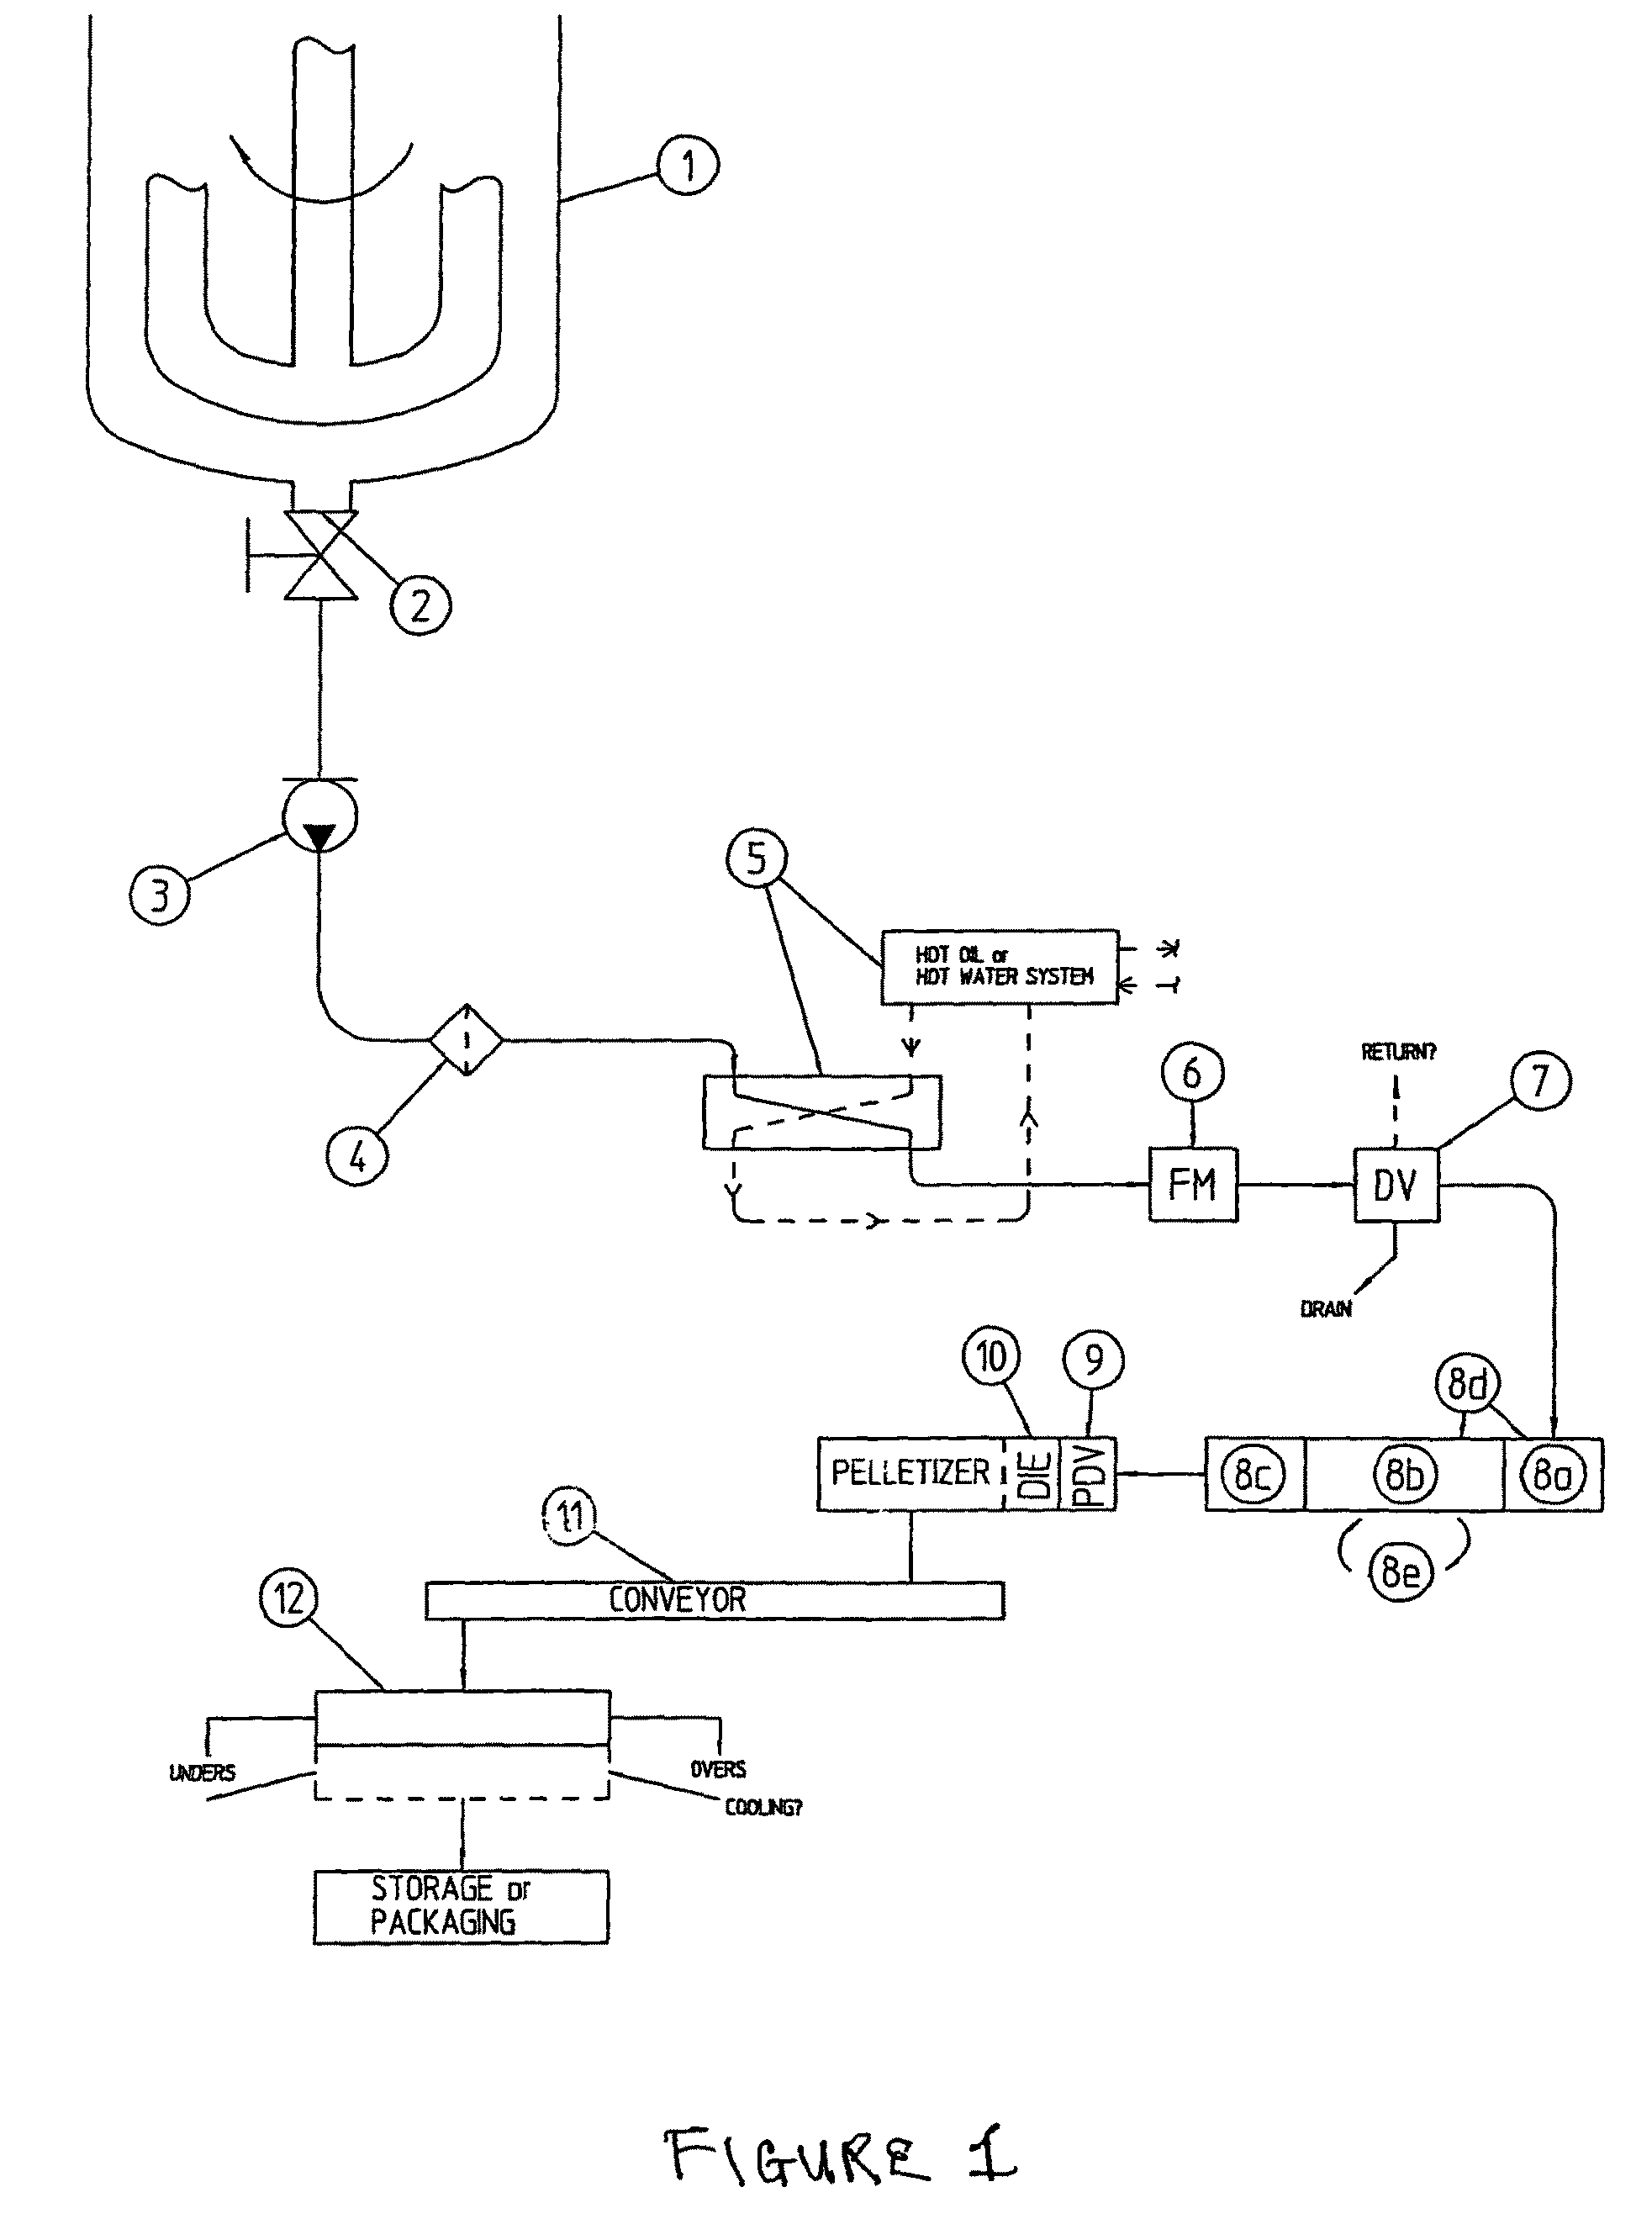 Apparatus and method for pelletizing wax and wax-like materials